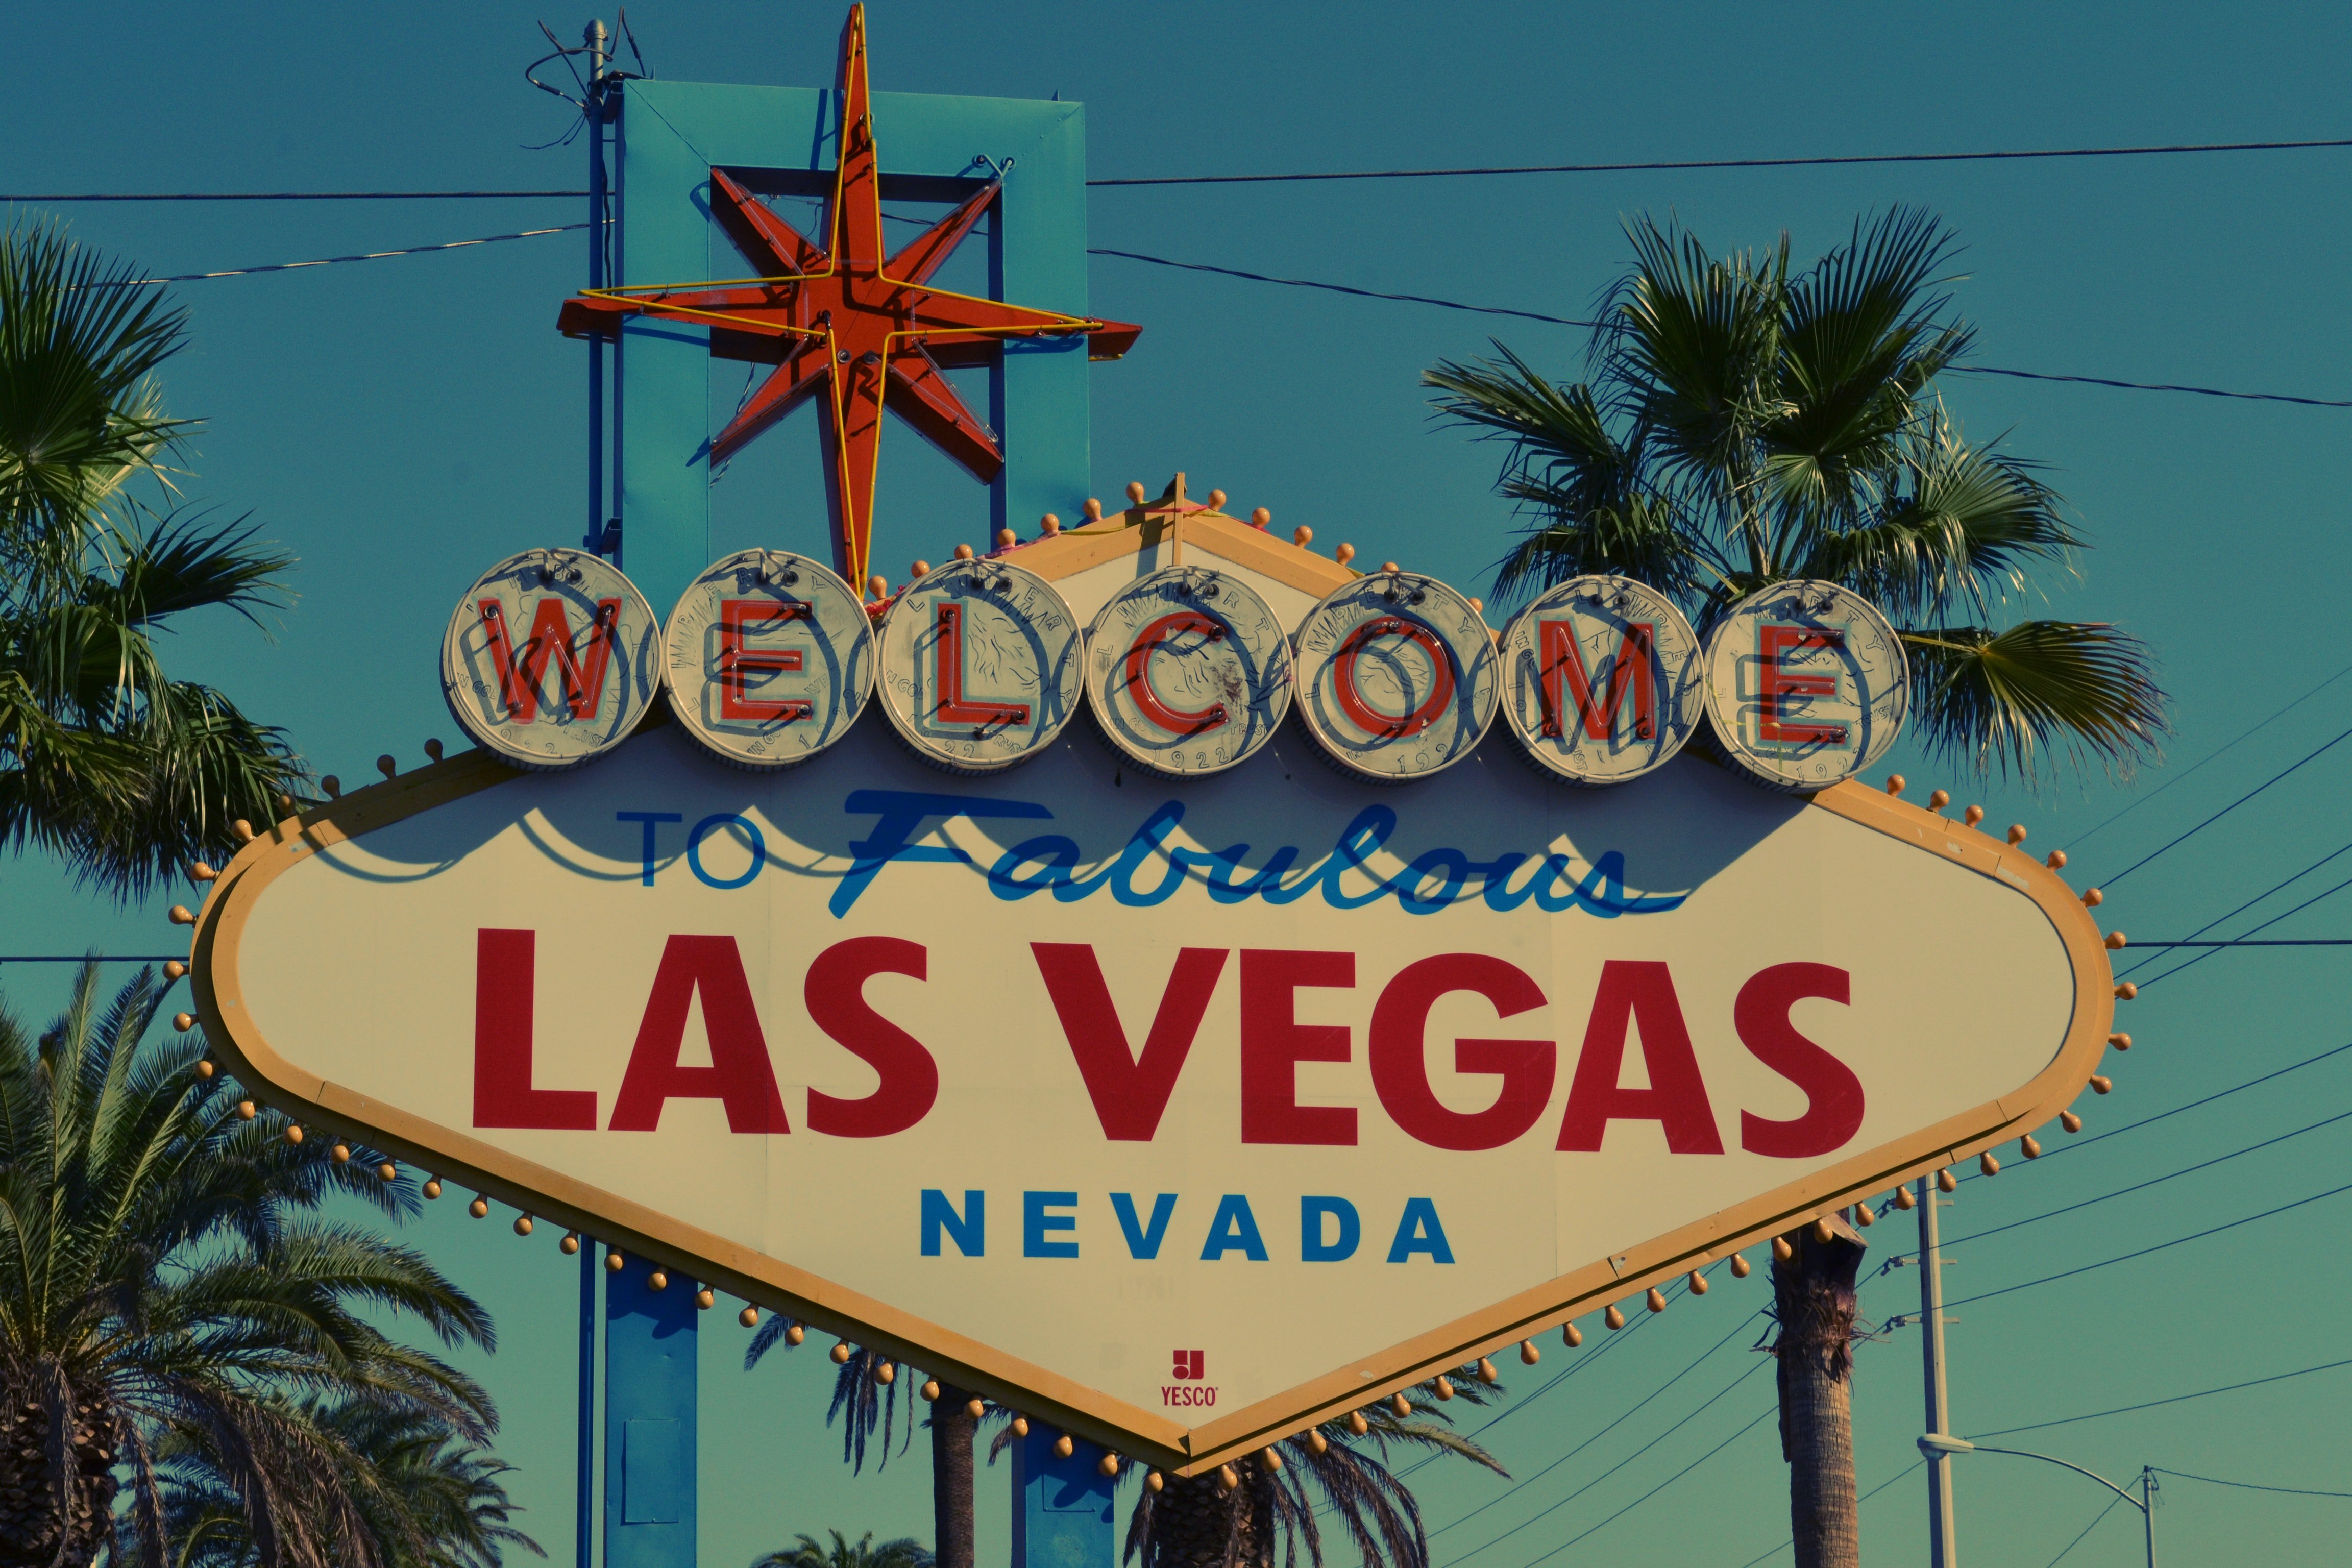 A welcome to Las Vegas sign | Photo: Pixabay